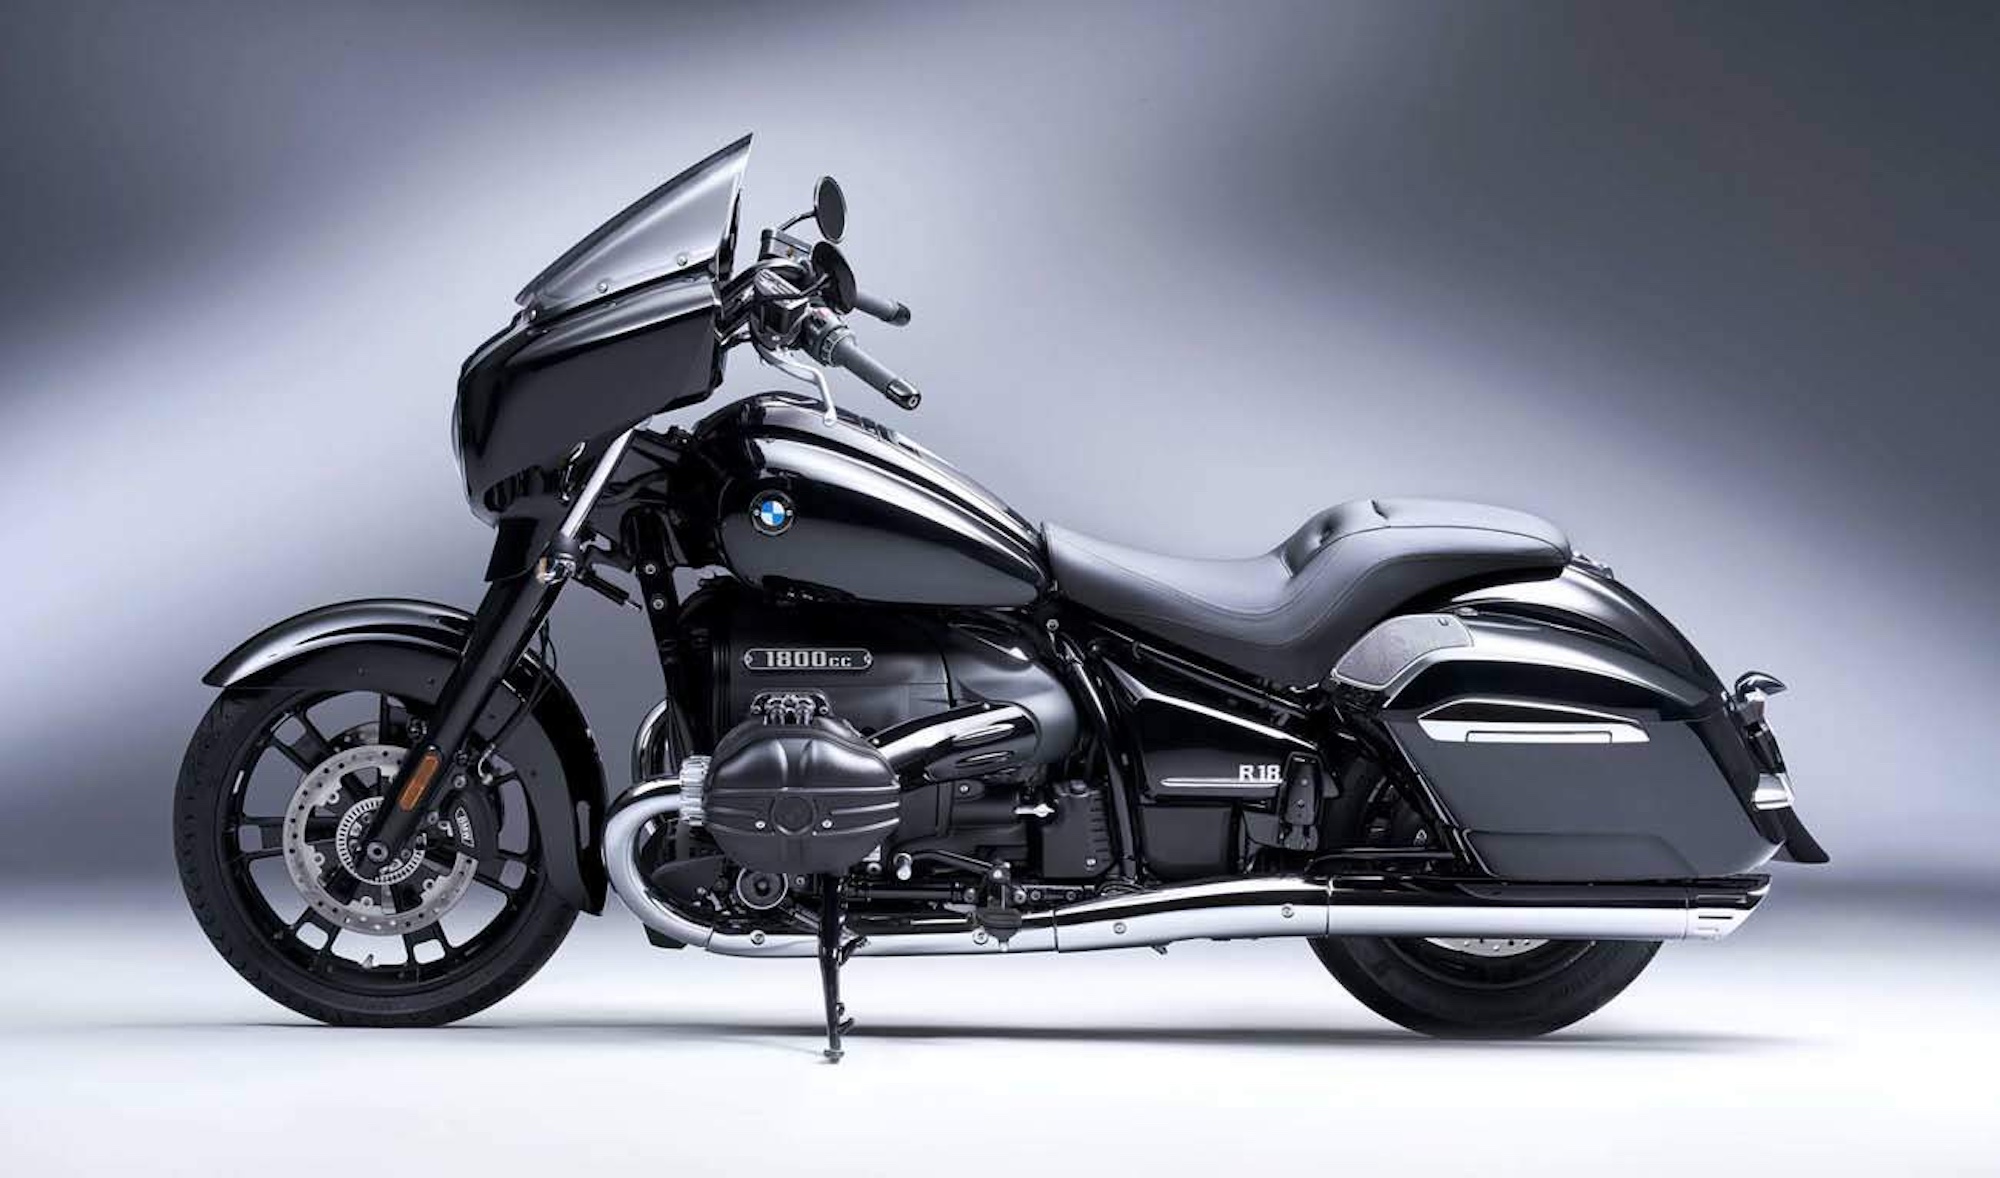 A side view of a BMW motorcycle.